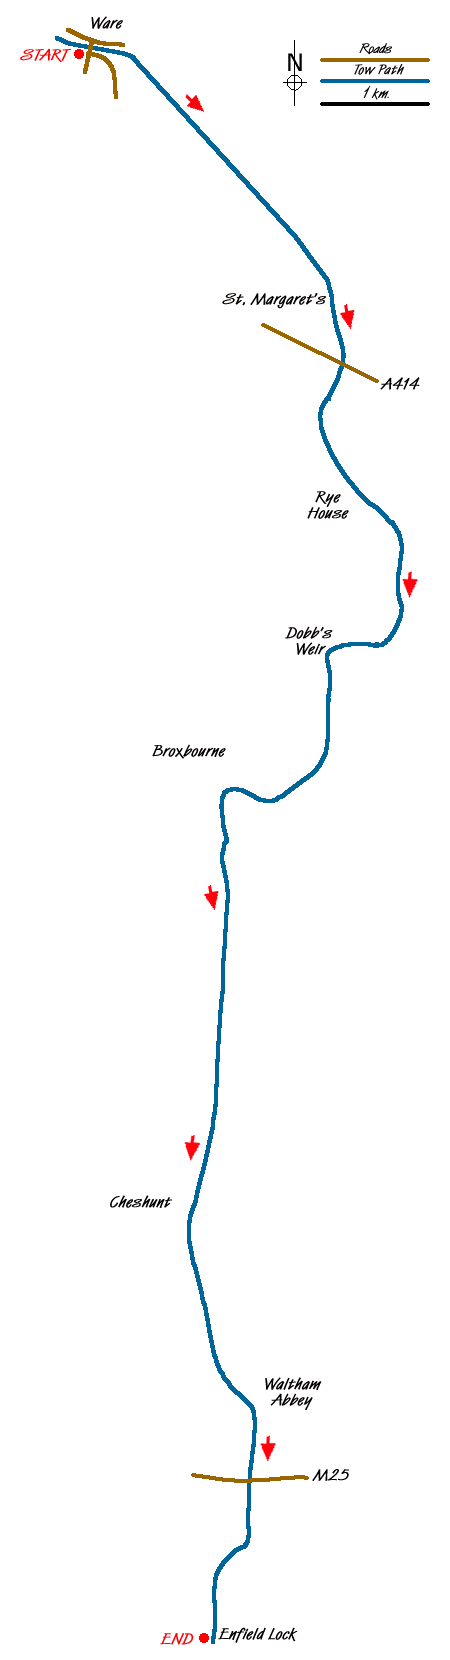 Walk 1698 Route Map